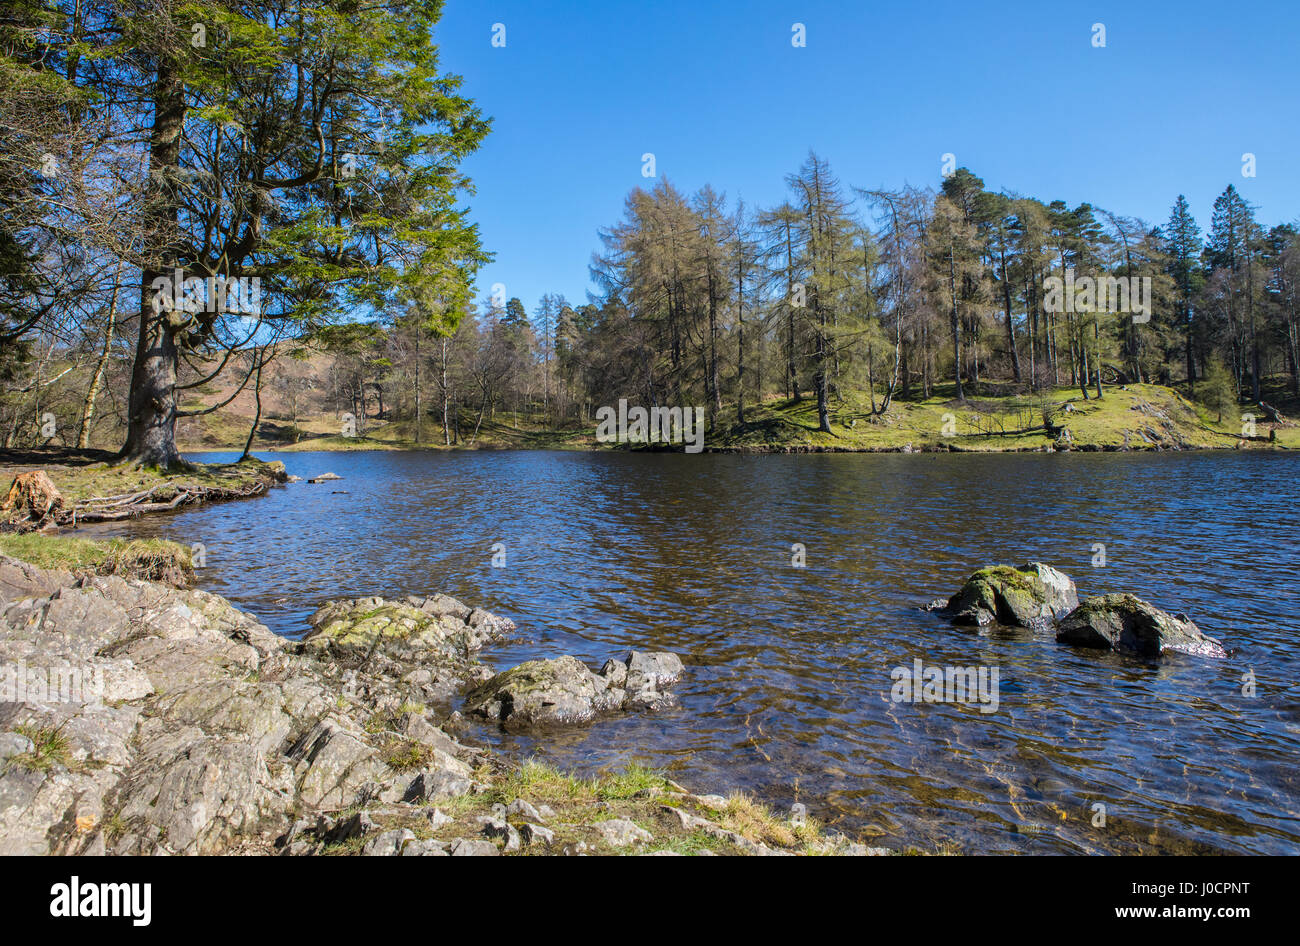 The picturesque scenery of Tarn Hows in the Lake District in Cumbria, UK. Stock Photo